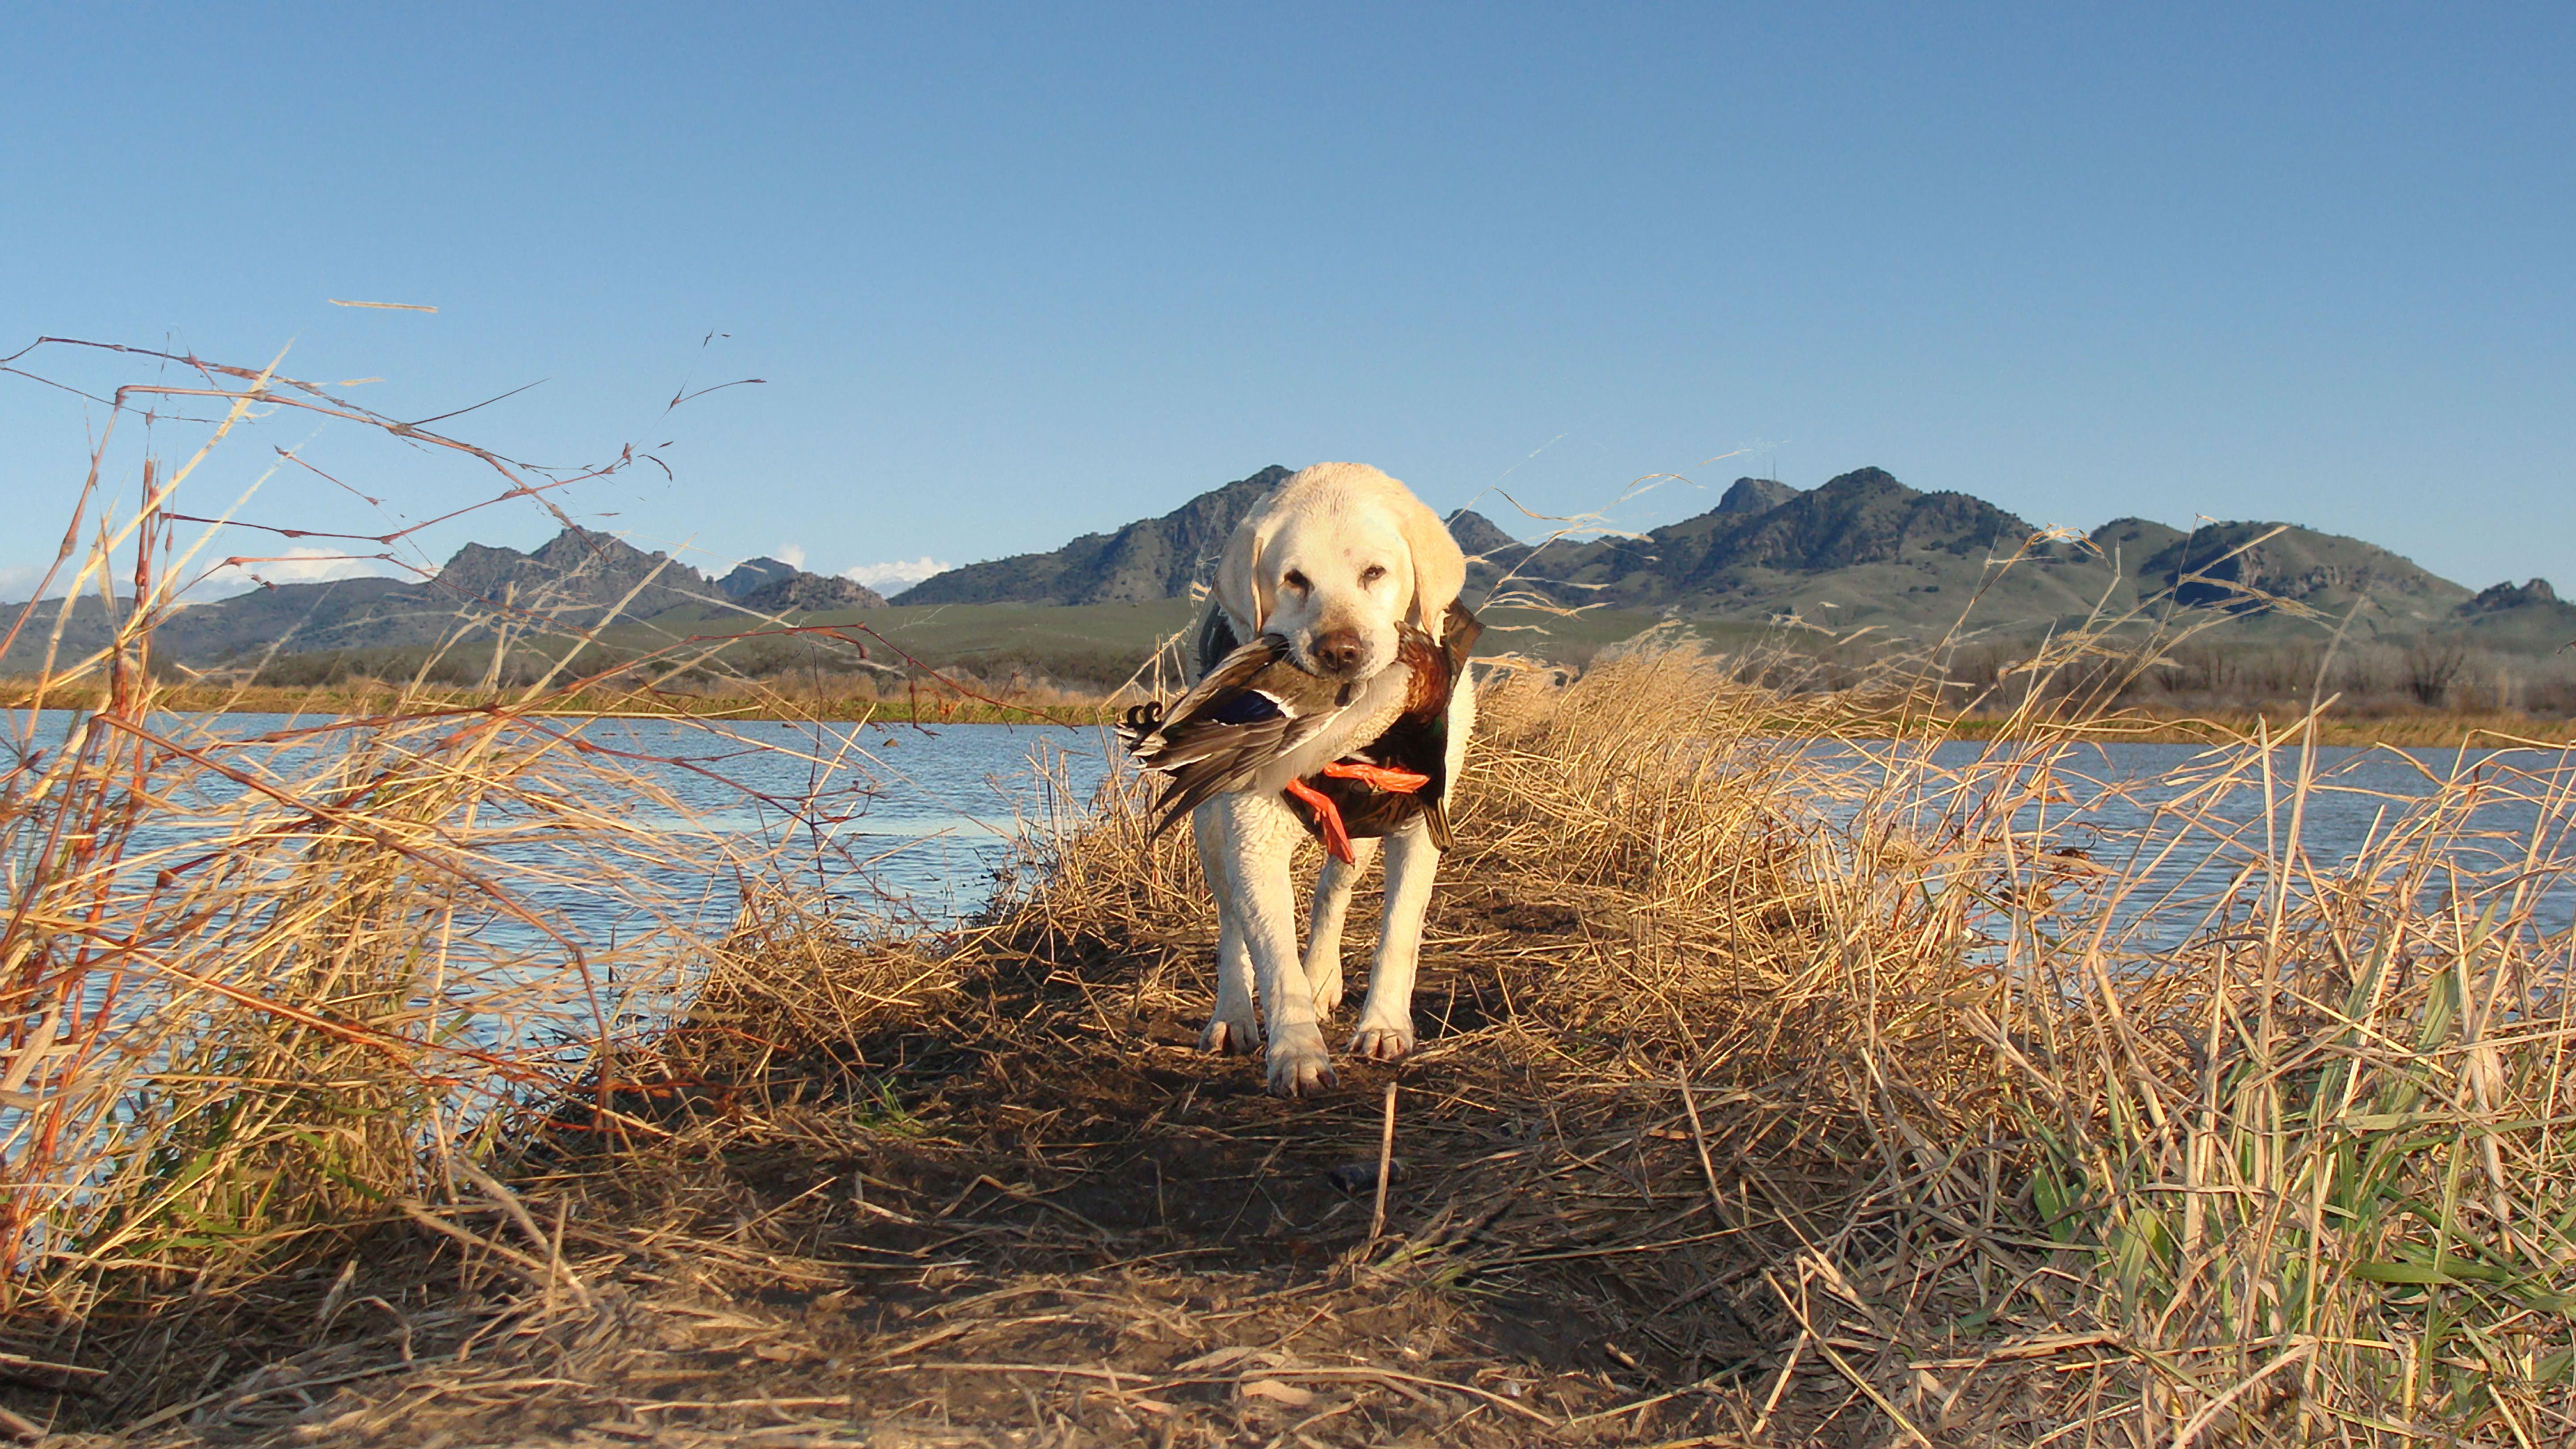 Black Lab Duck Hunting Wallpapers - Wallpaper Cave